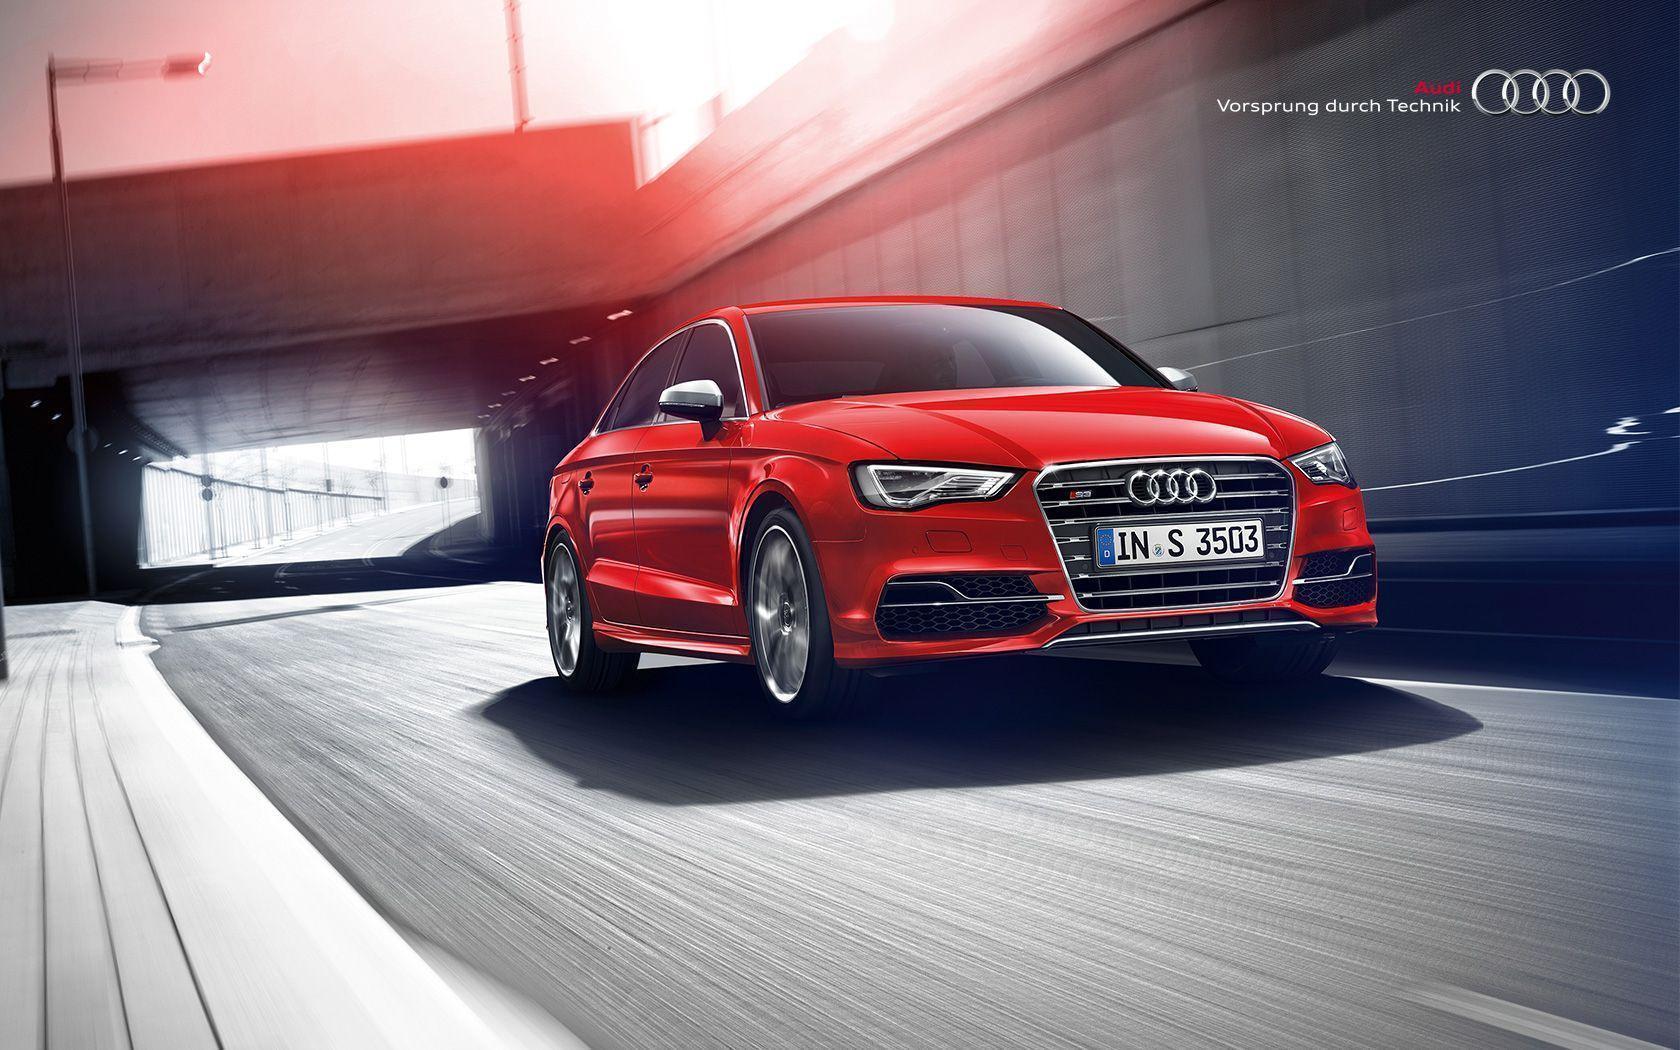 Audi A3 Hd Wallpapers Free Download